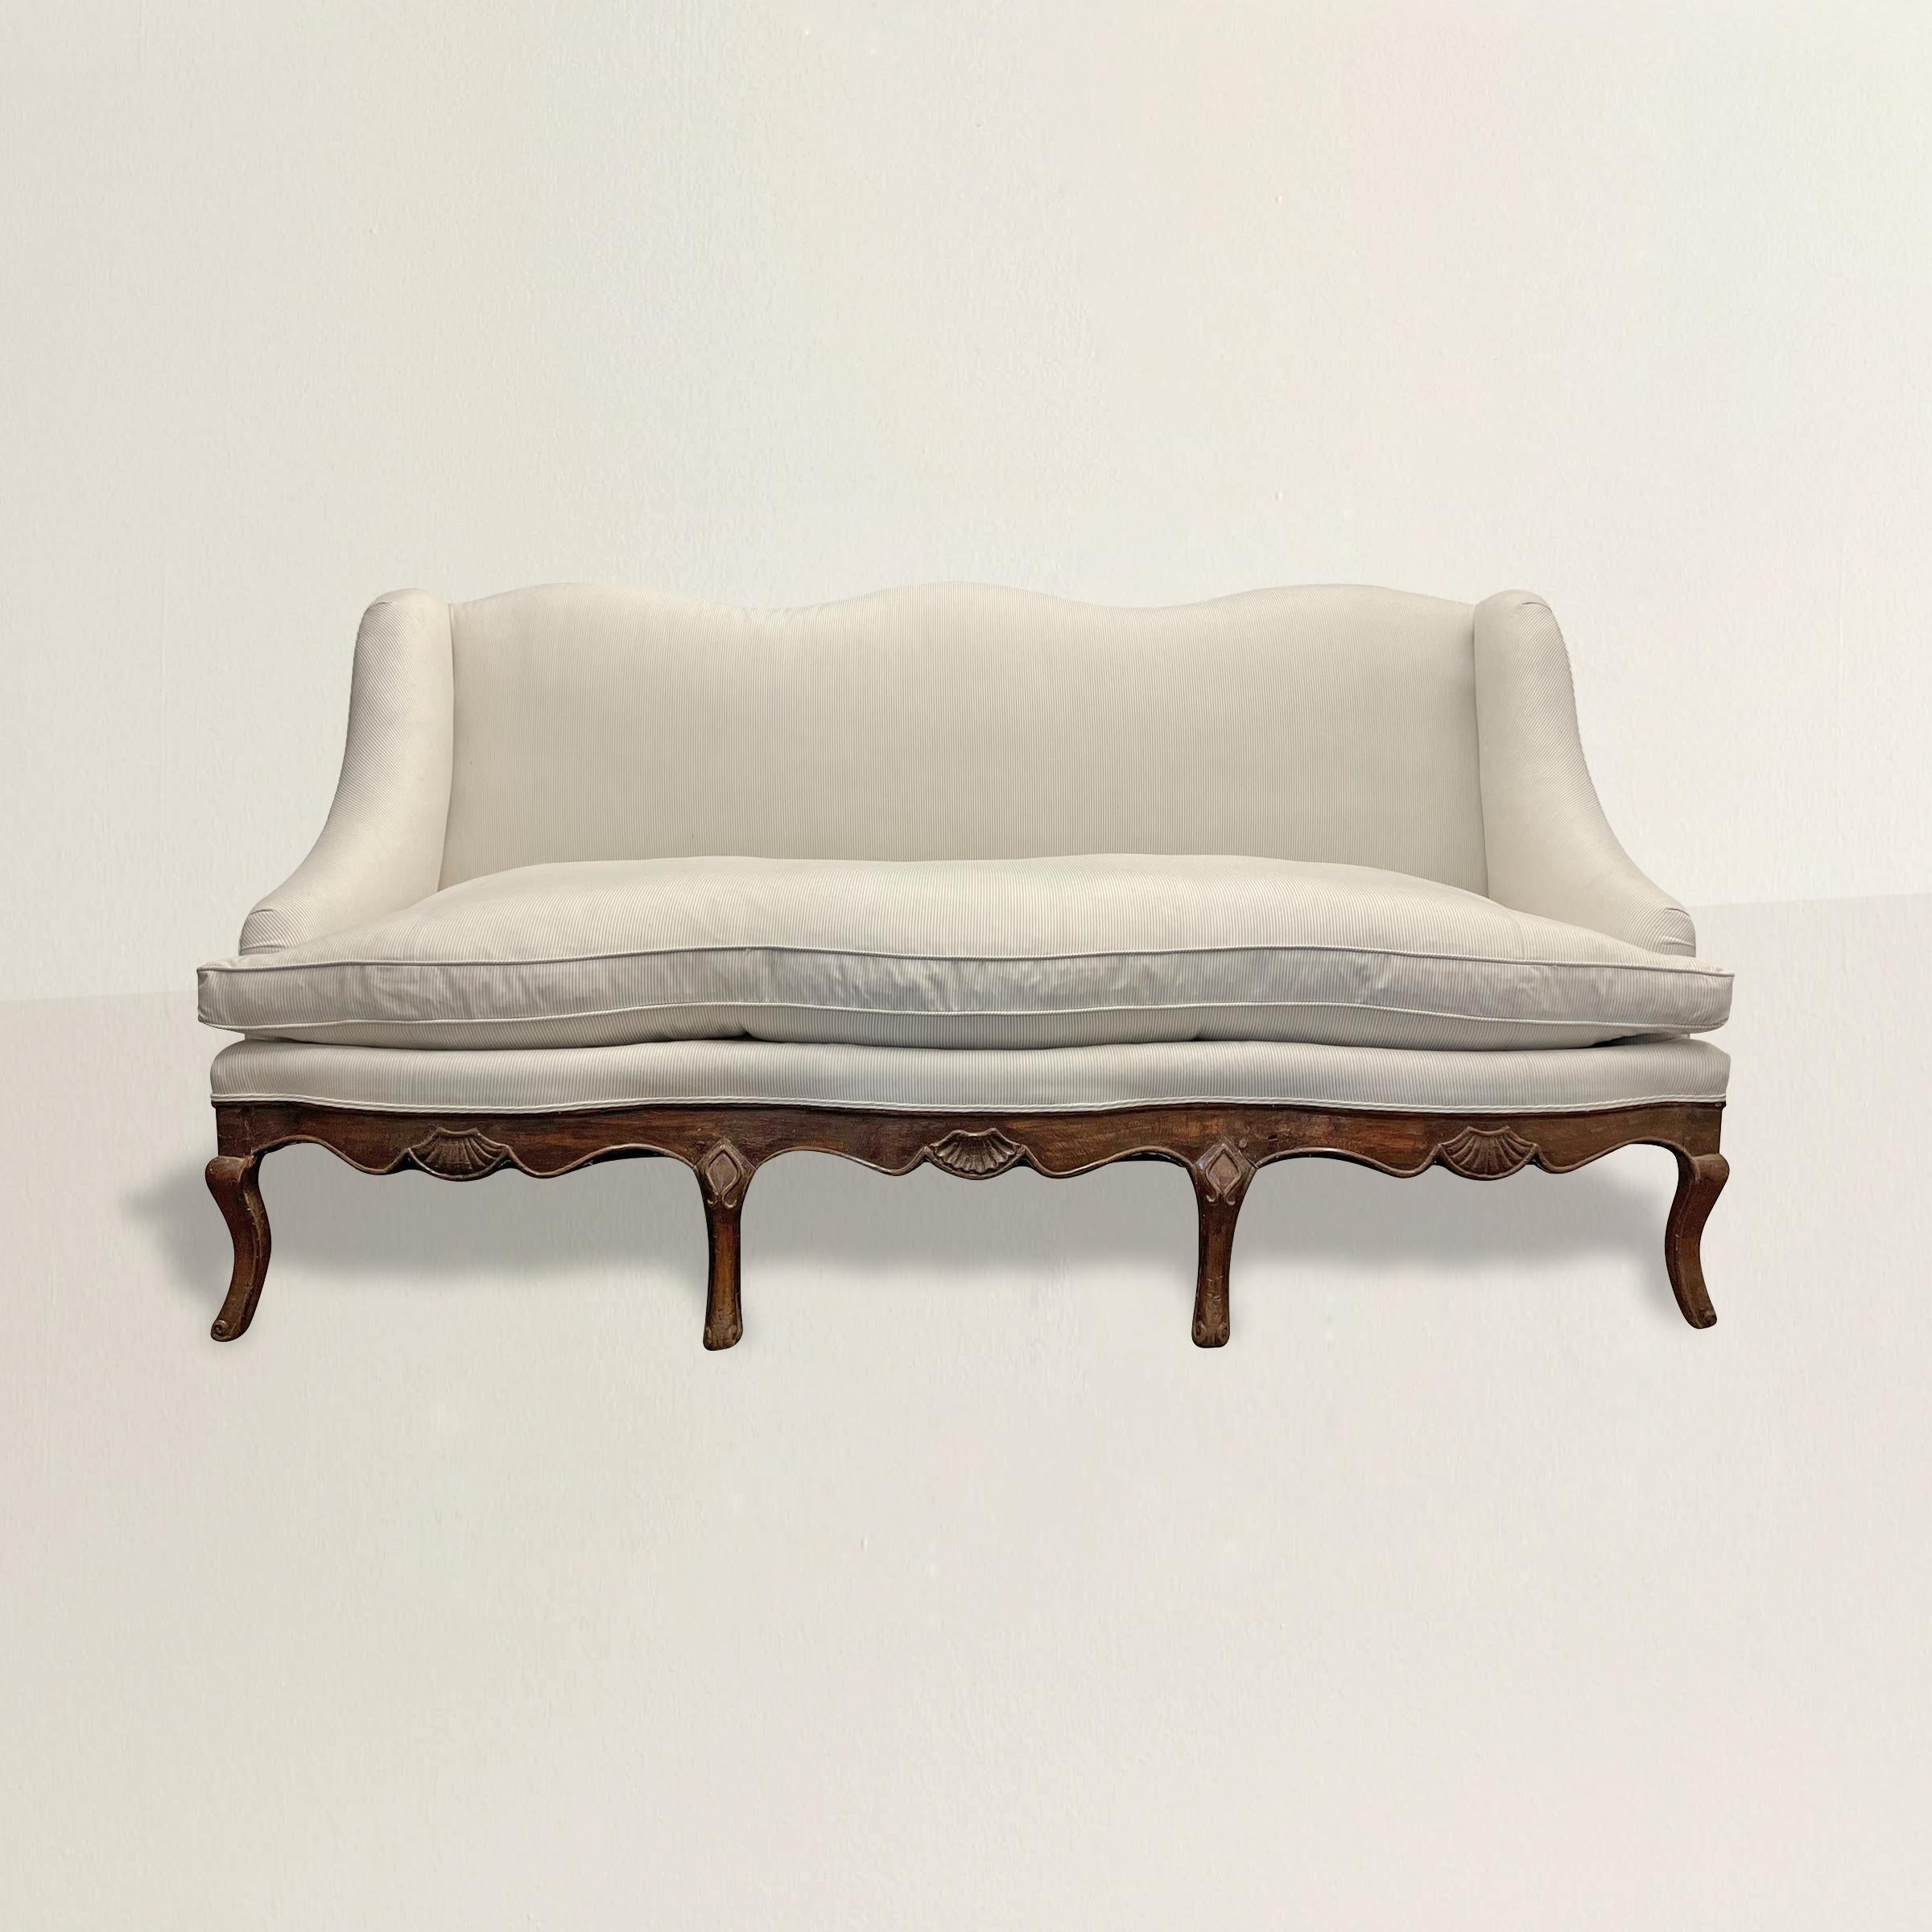 Transport yourself to the opulence and sophistication of 18th century France with this exquisite Louis XV sofa, a testament to the era's grace and elegance. Its curvaceous serpentine shape and perfectly pitched back epitomize the Rococo style, while